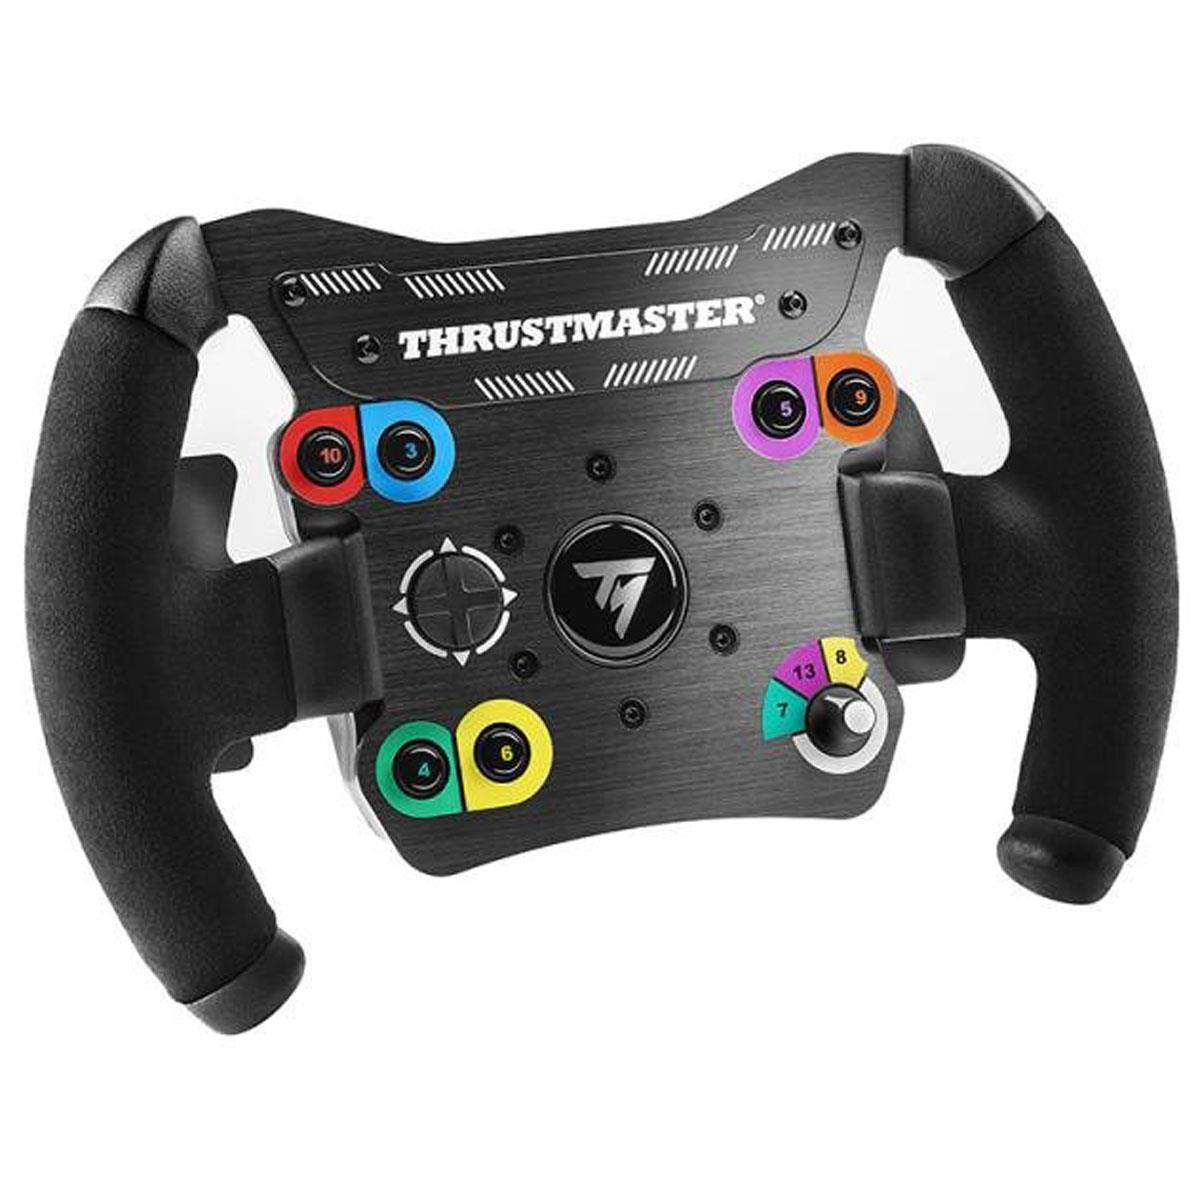 Thrustmaster TM Open Wheel Add-On for PlayStation 4, Xbox One, PC, Black